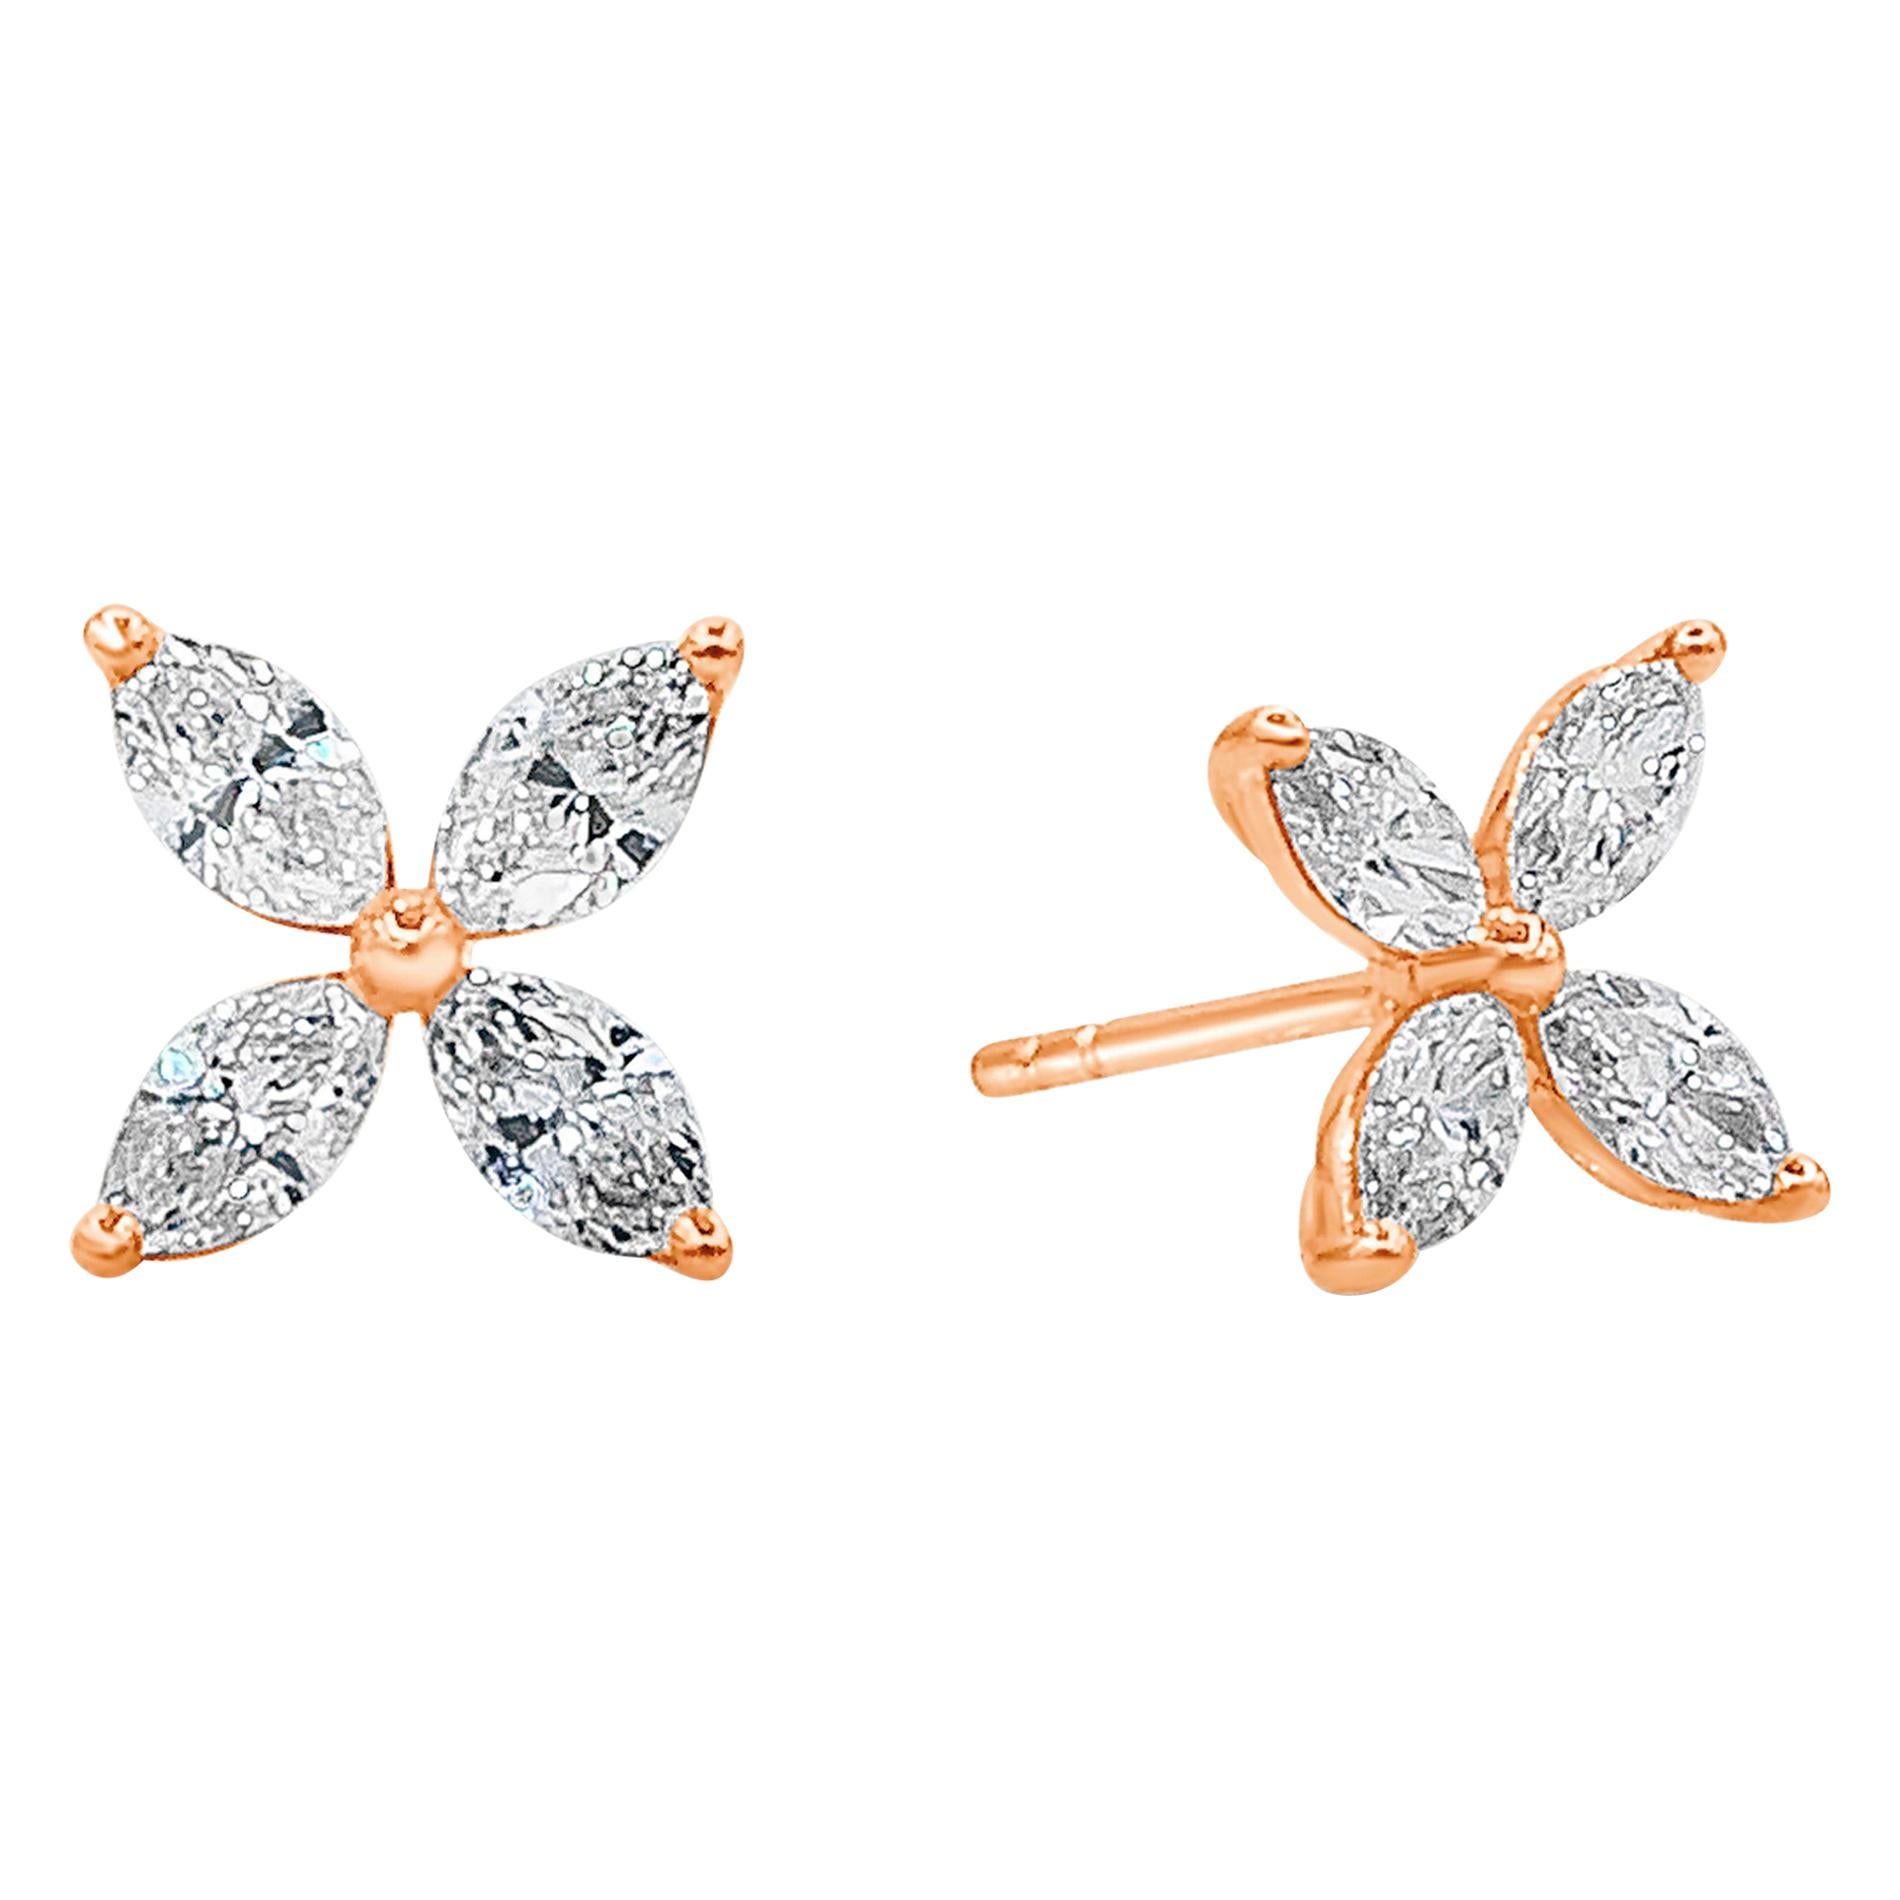 A charming pair of stud earrings showcasing 4 marquis cut diamonds on each earrings set and style in a flower motif design. Diamonds weigh 1.52 carats total F Color and VS in Clarity. Made in 18K Rose Gold. 

Style available in different price